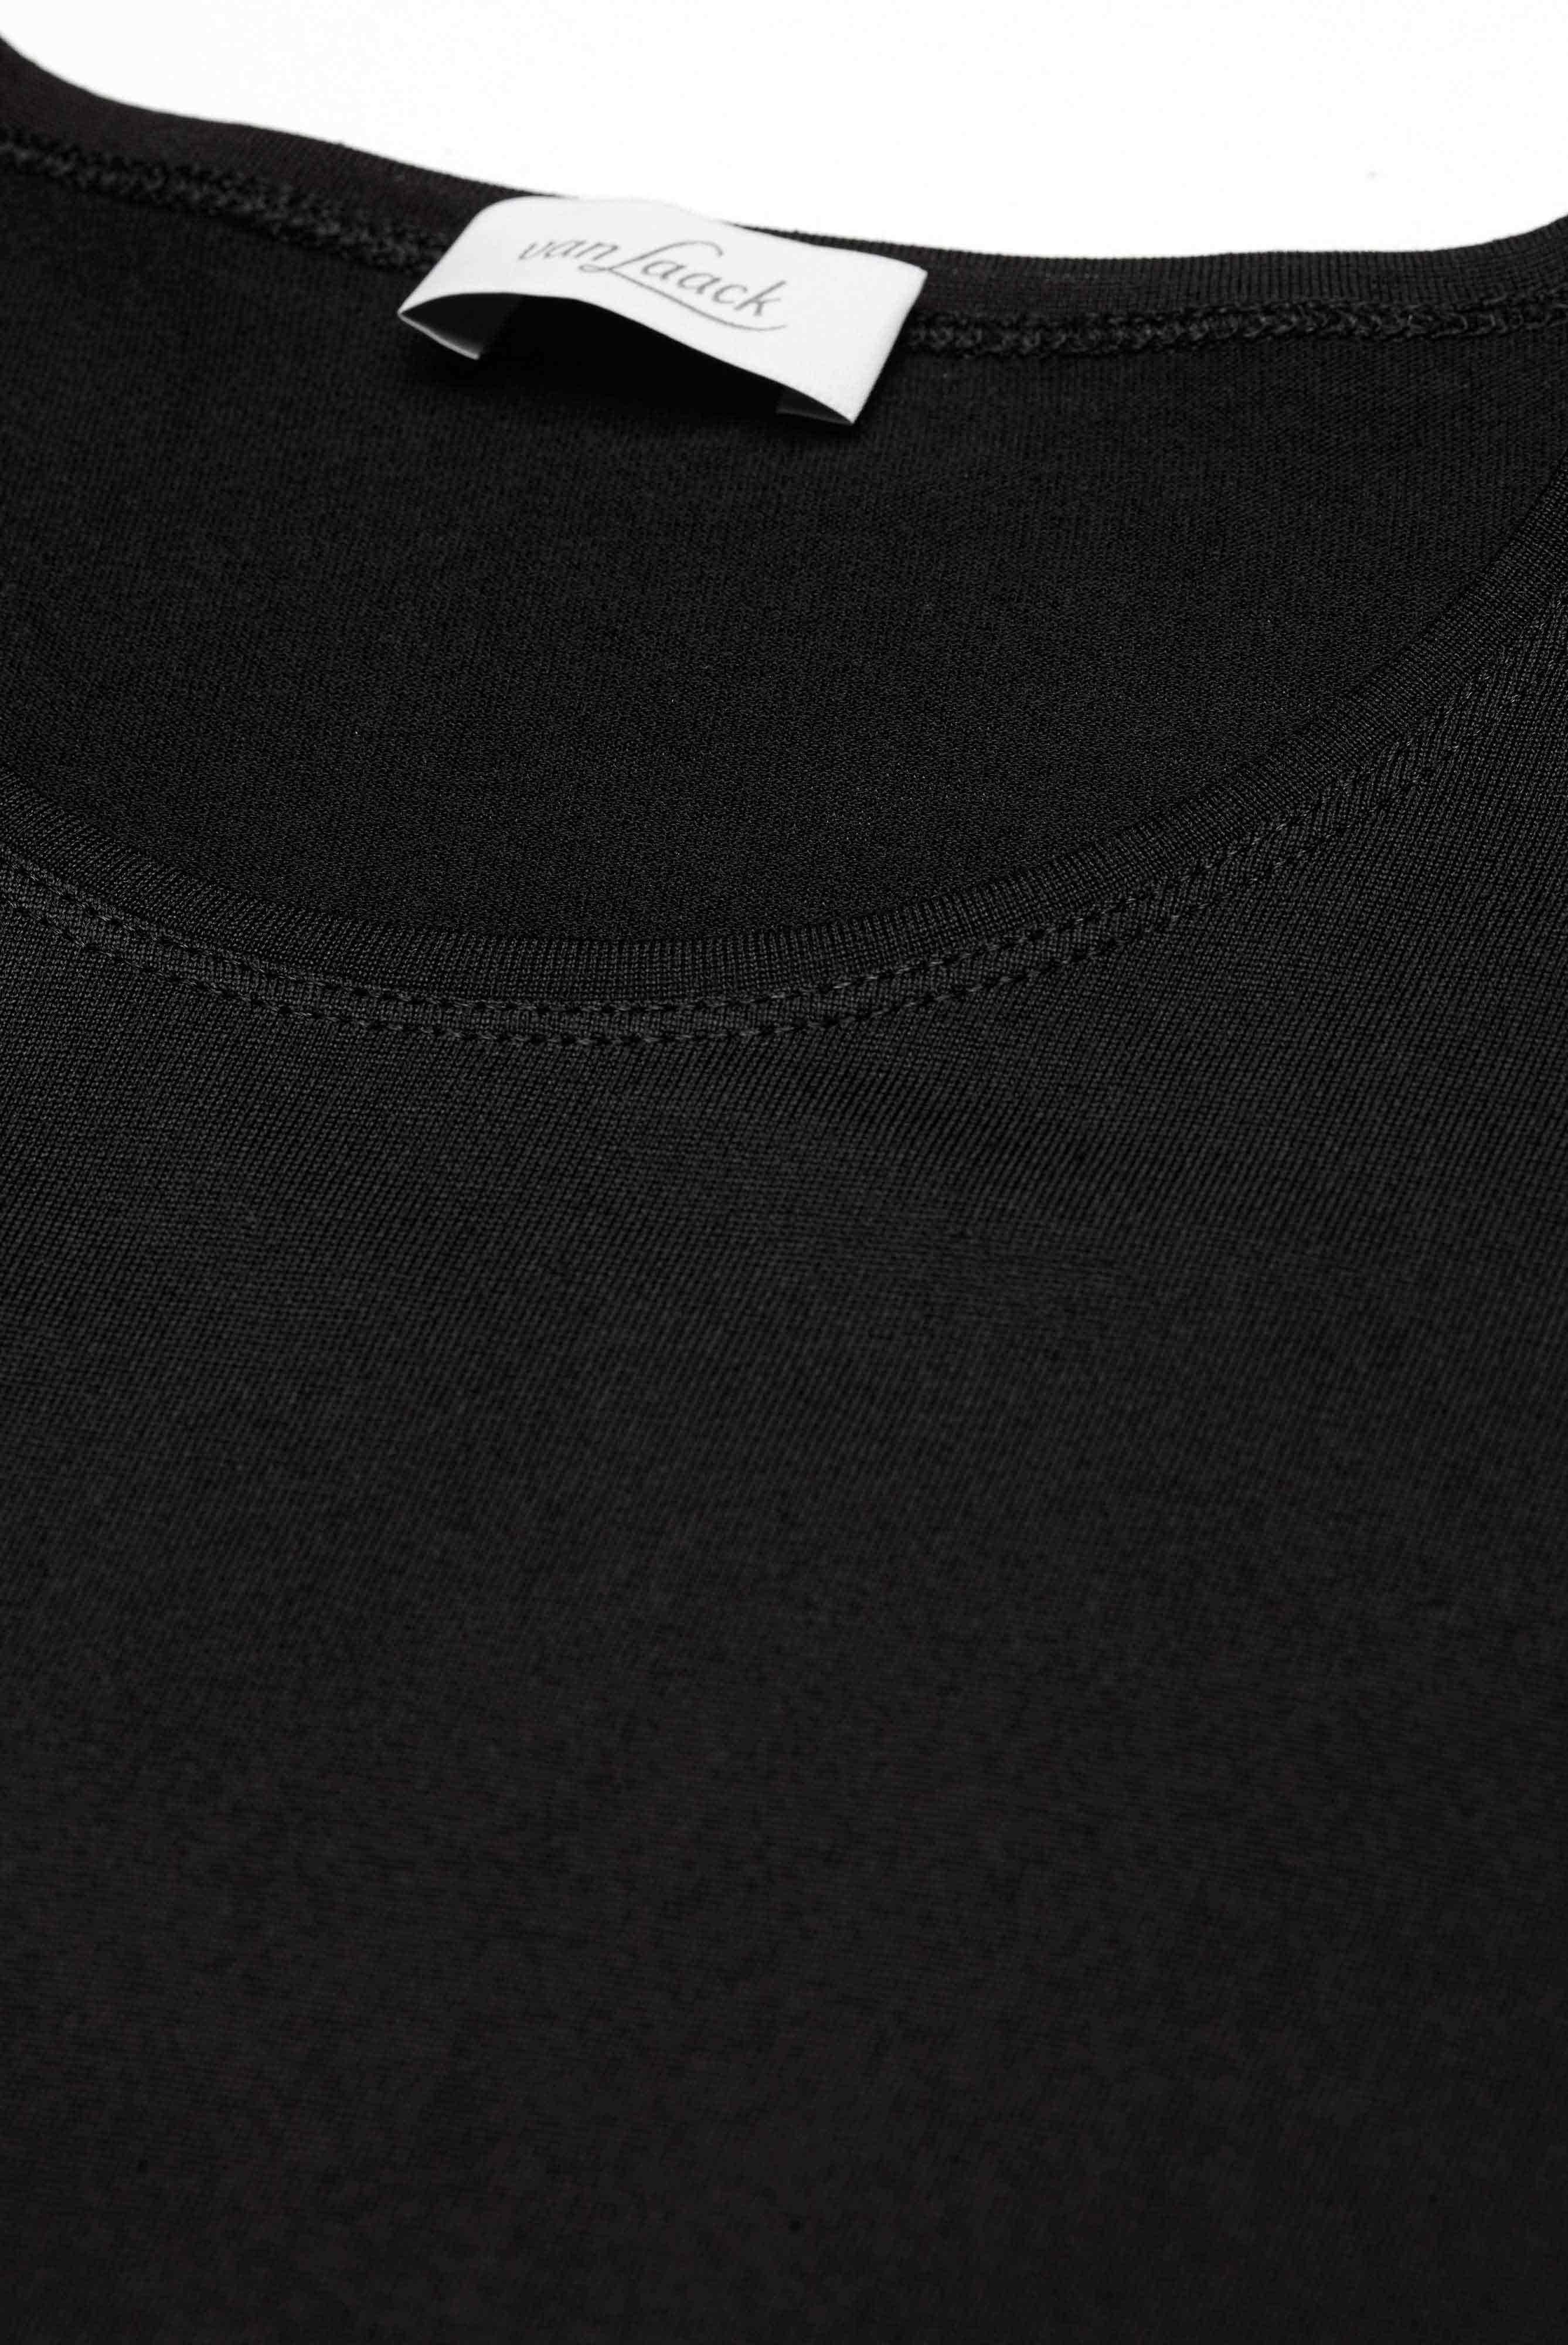 Tops & T-Shirts+Roundneck T-shirt with Silk+07.2122..Z20090.099.44